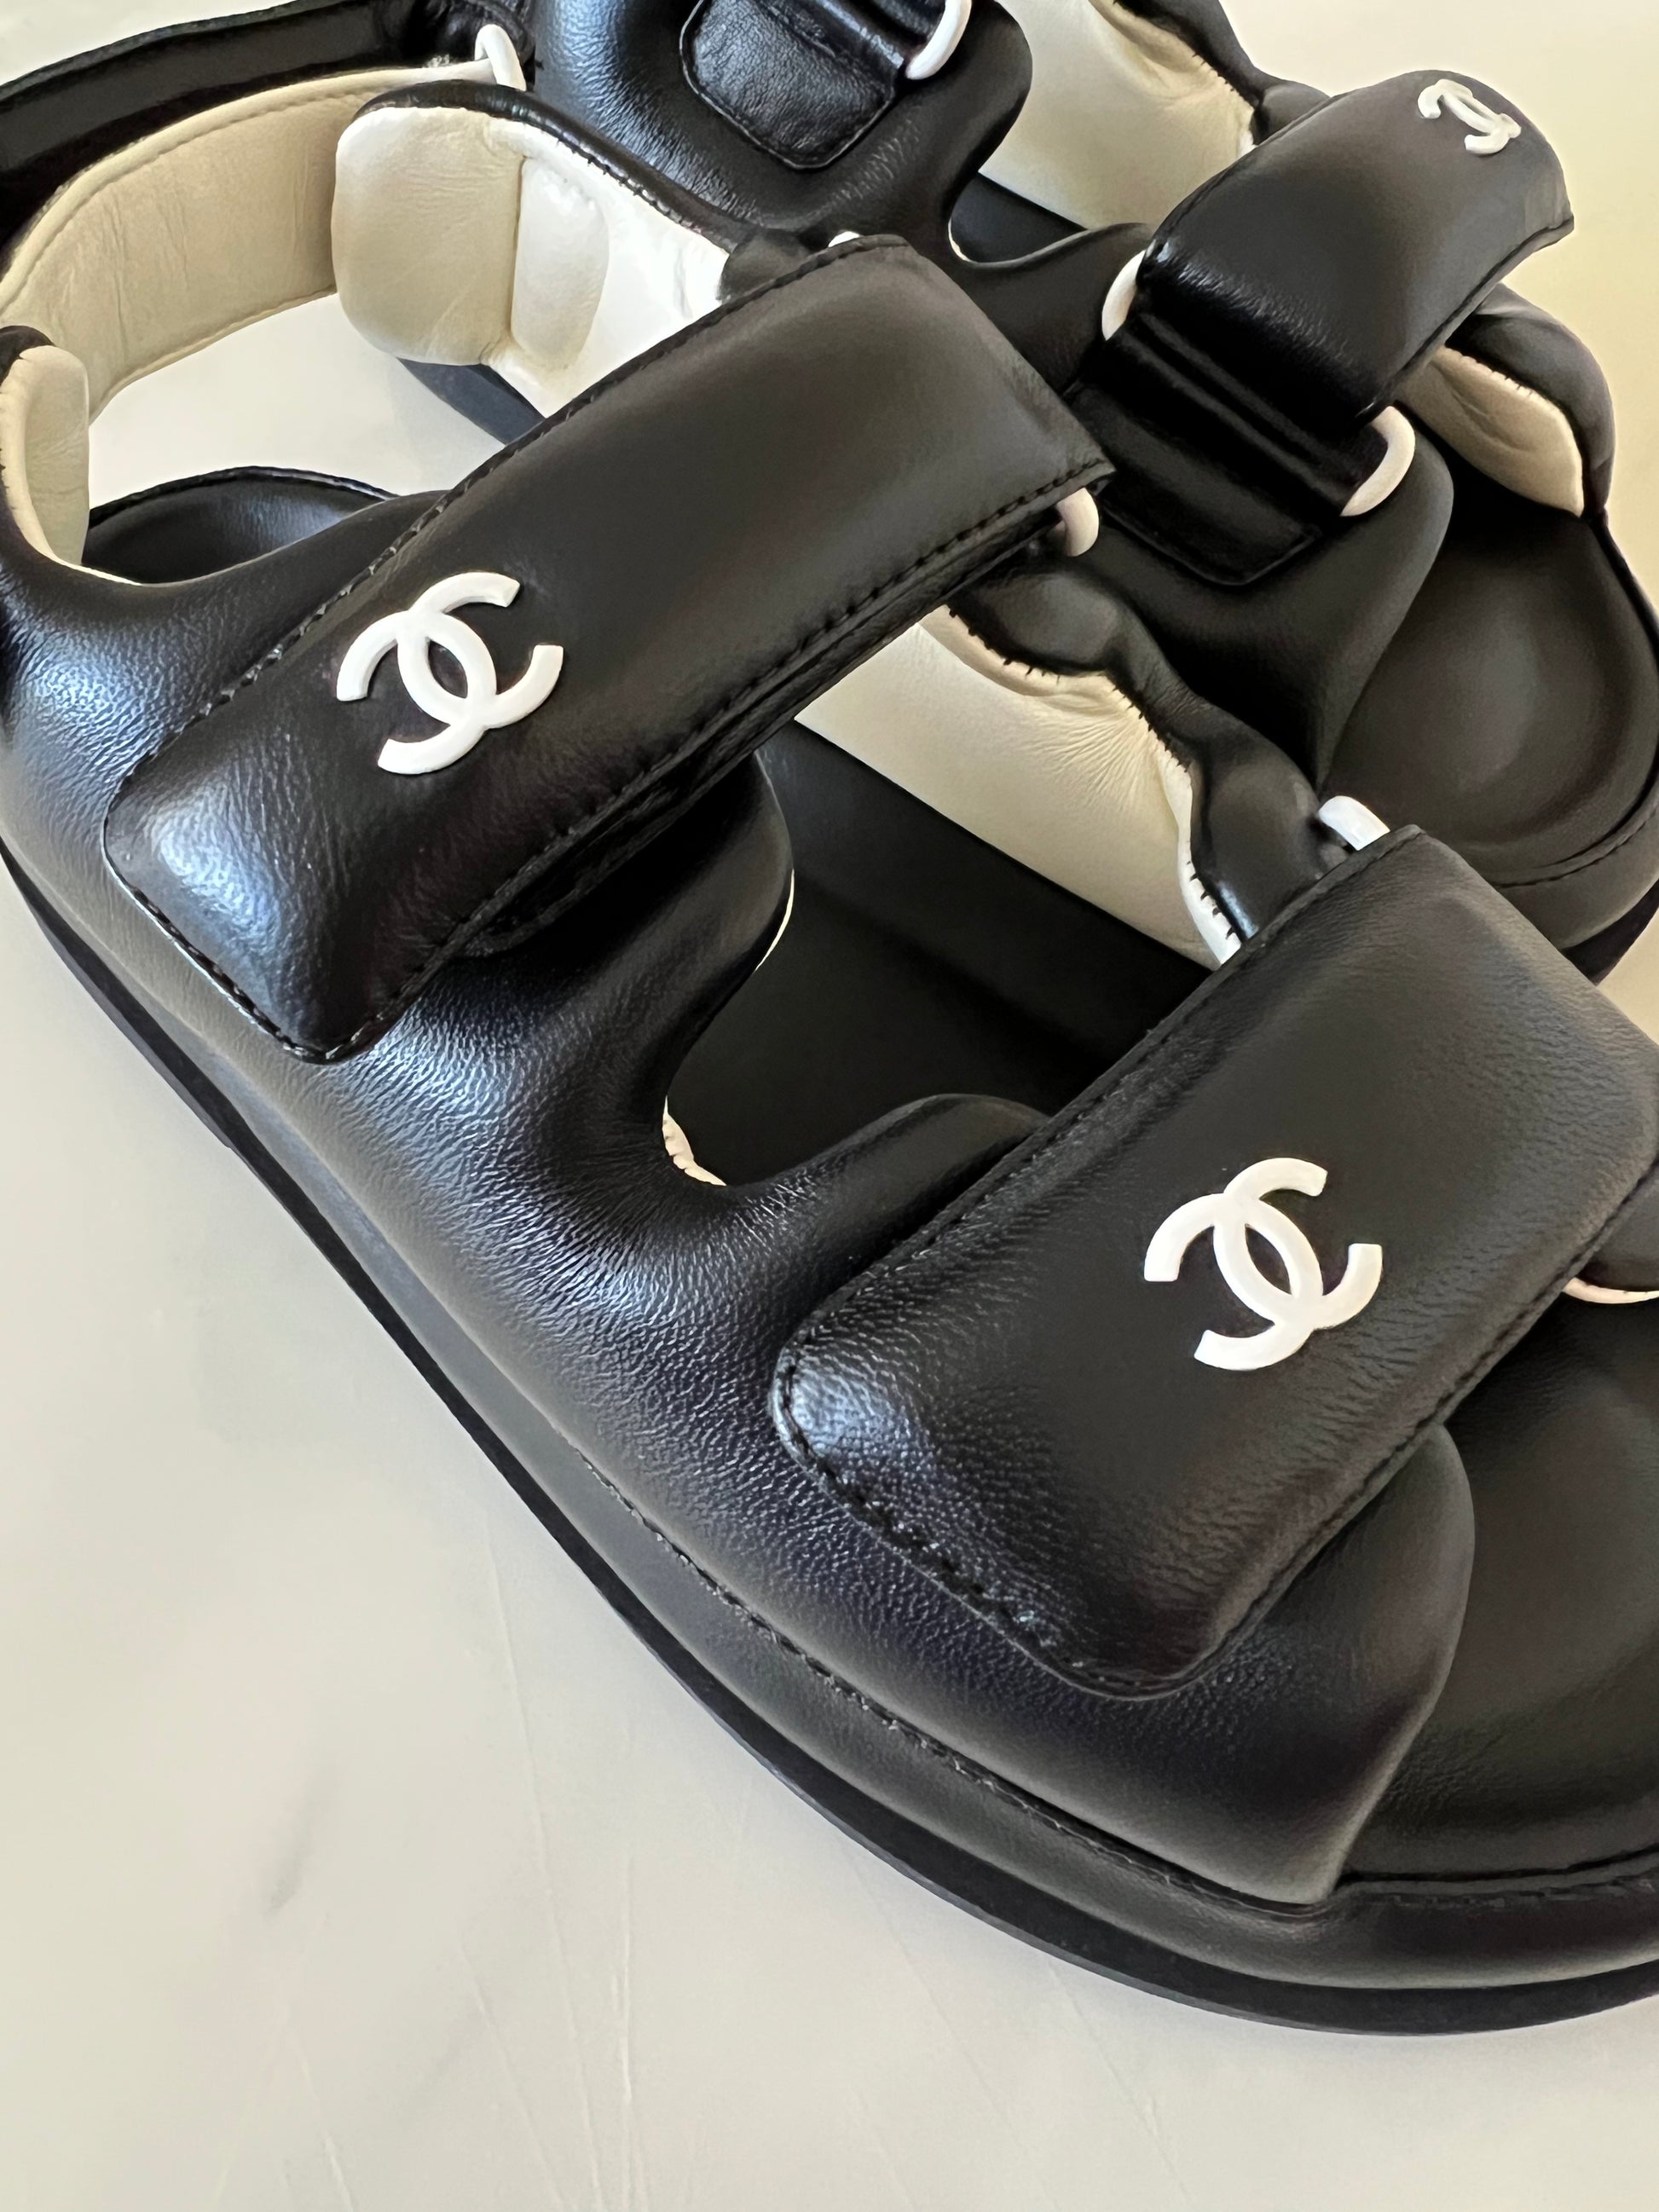 CHANEL, Shoes, Size 37 Brand New Chanel Sandals Black Calfskin Gold Tweed  Beautiful